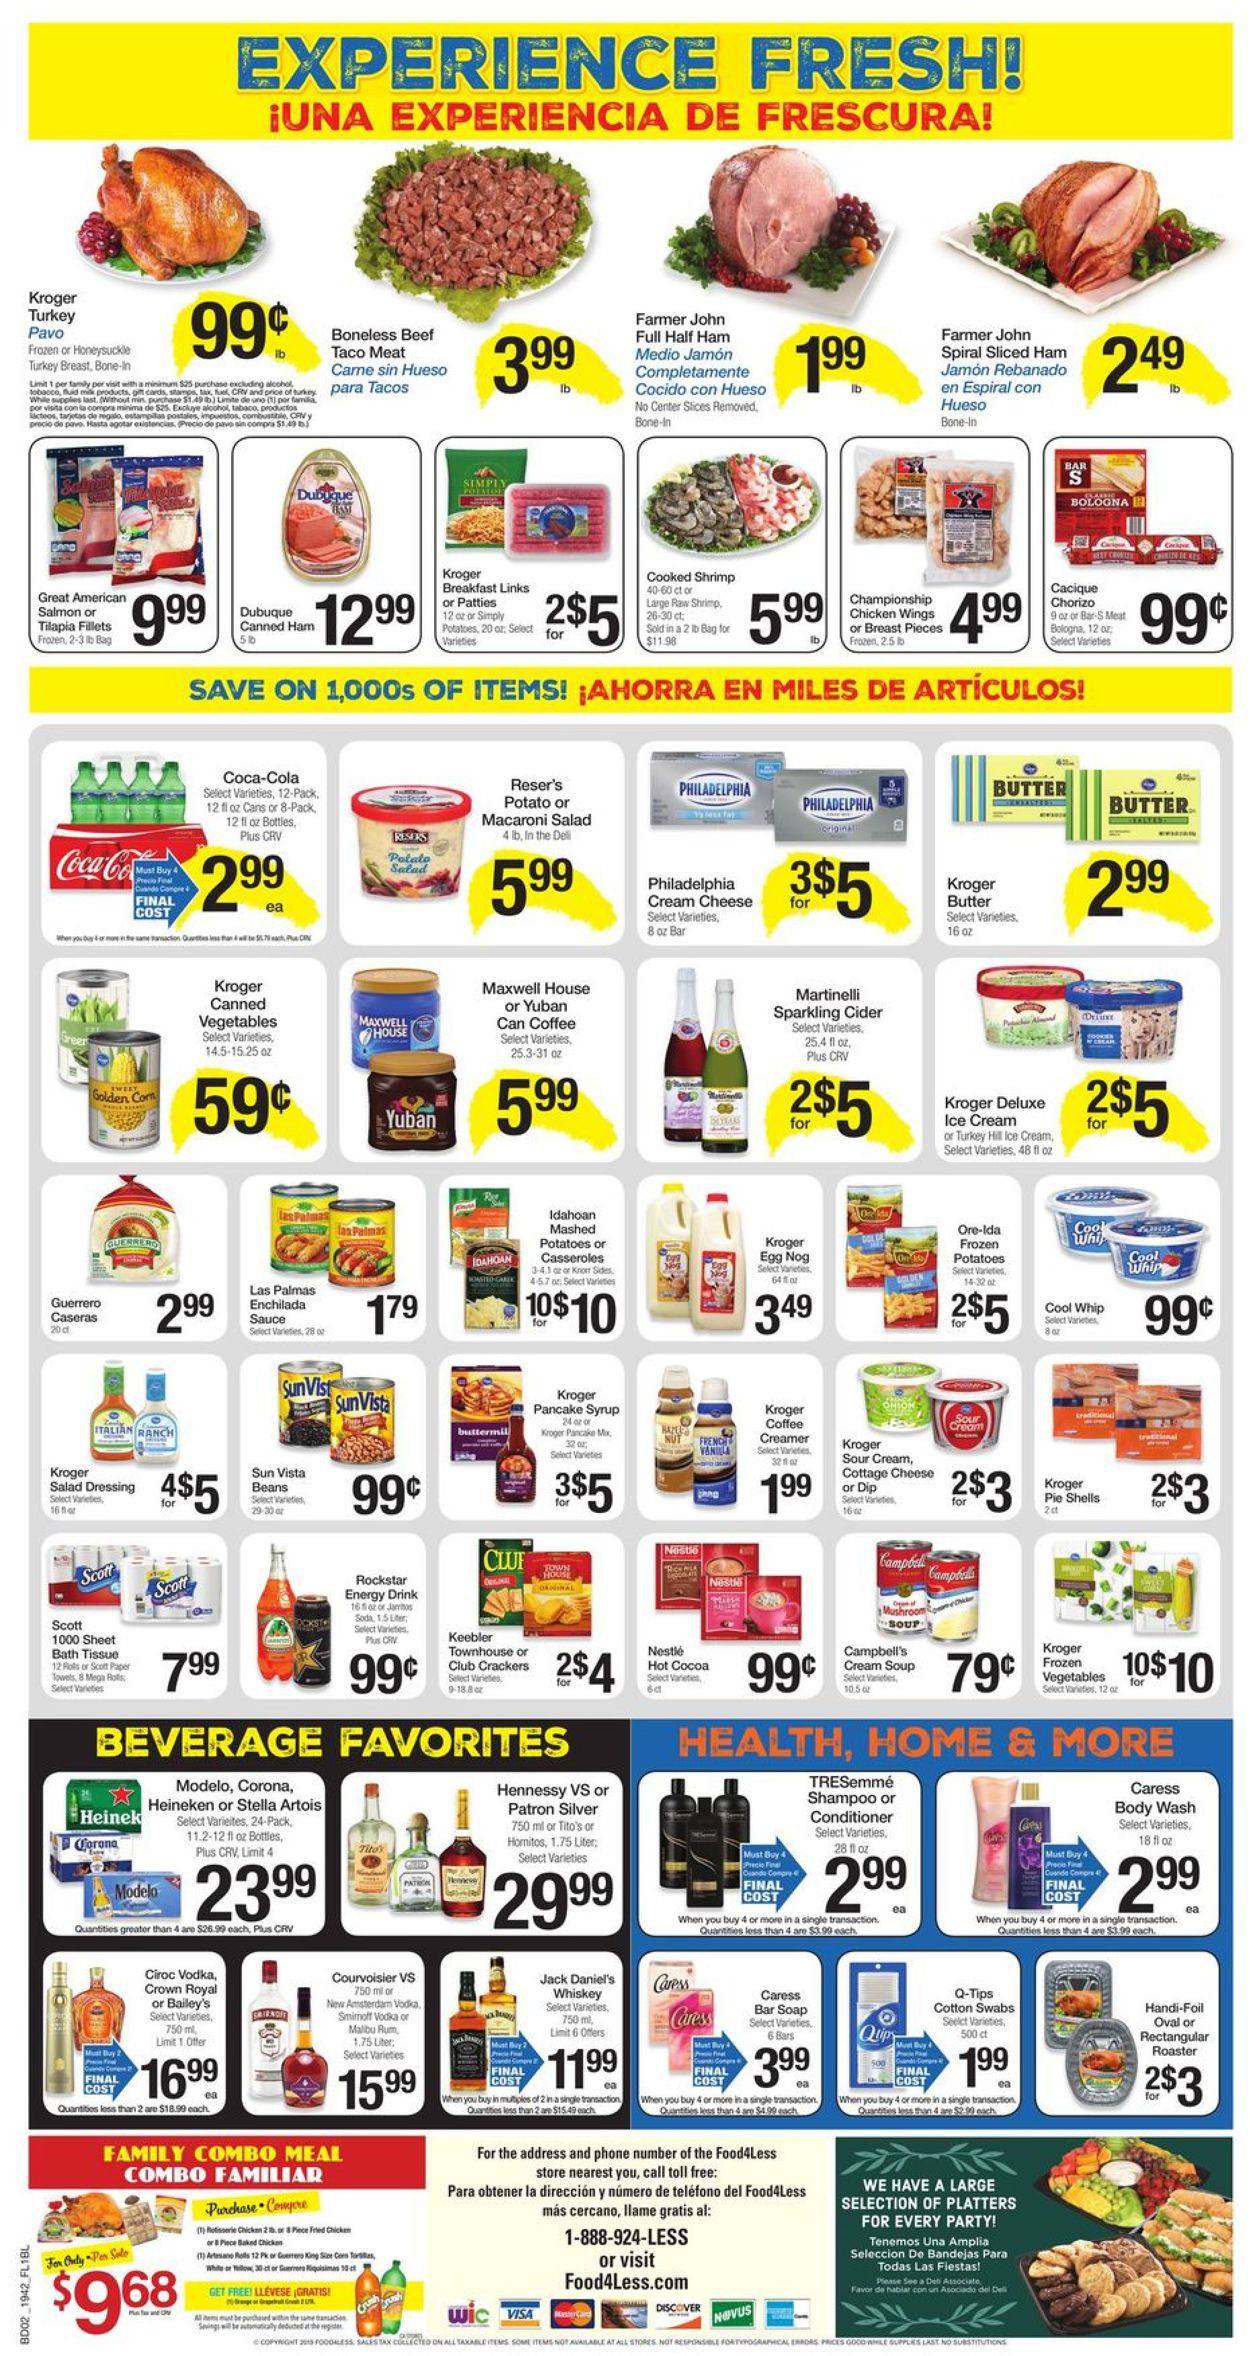 Food 4 Less Current weekly ad 11/20 - 11/28/2019 [2] - frequent-ads.com